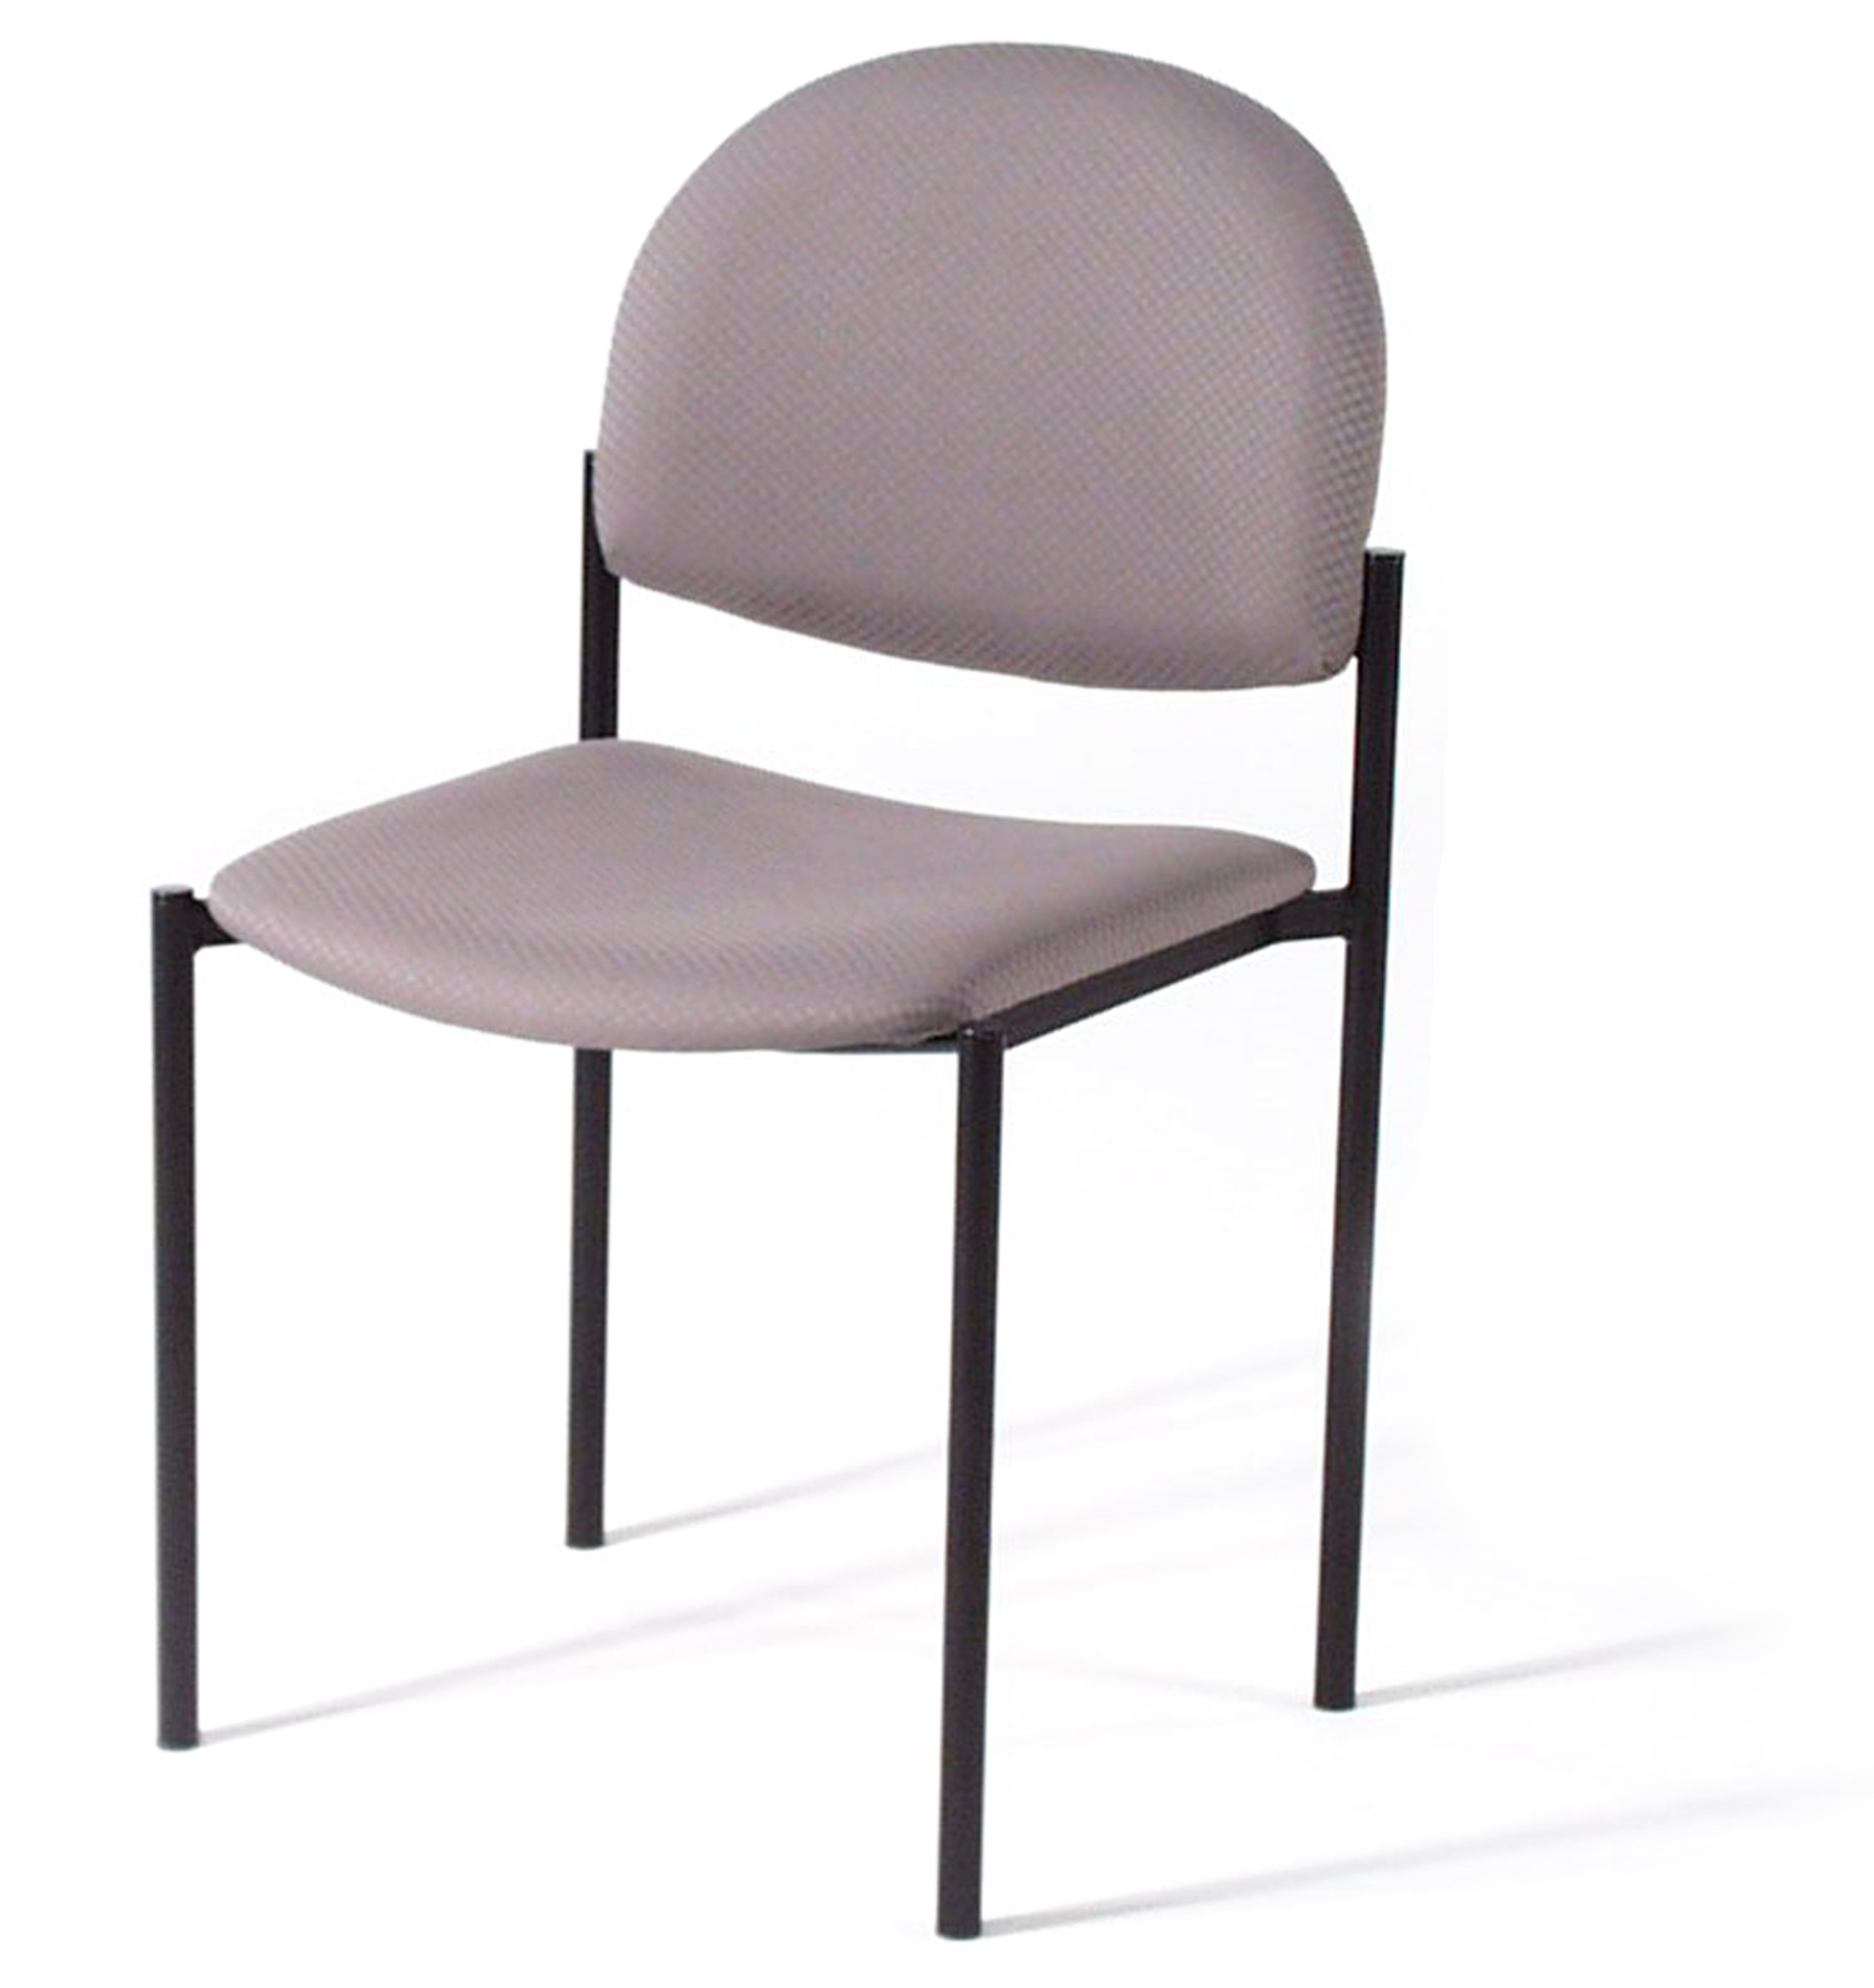 Seating Products, Supplies and Equipment